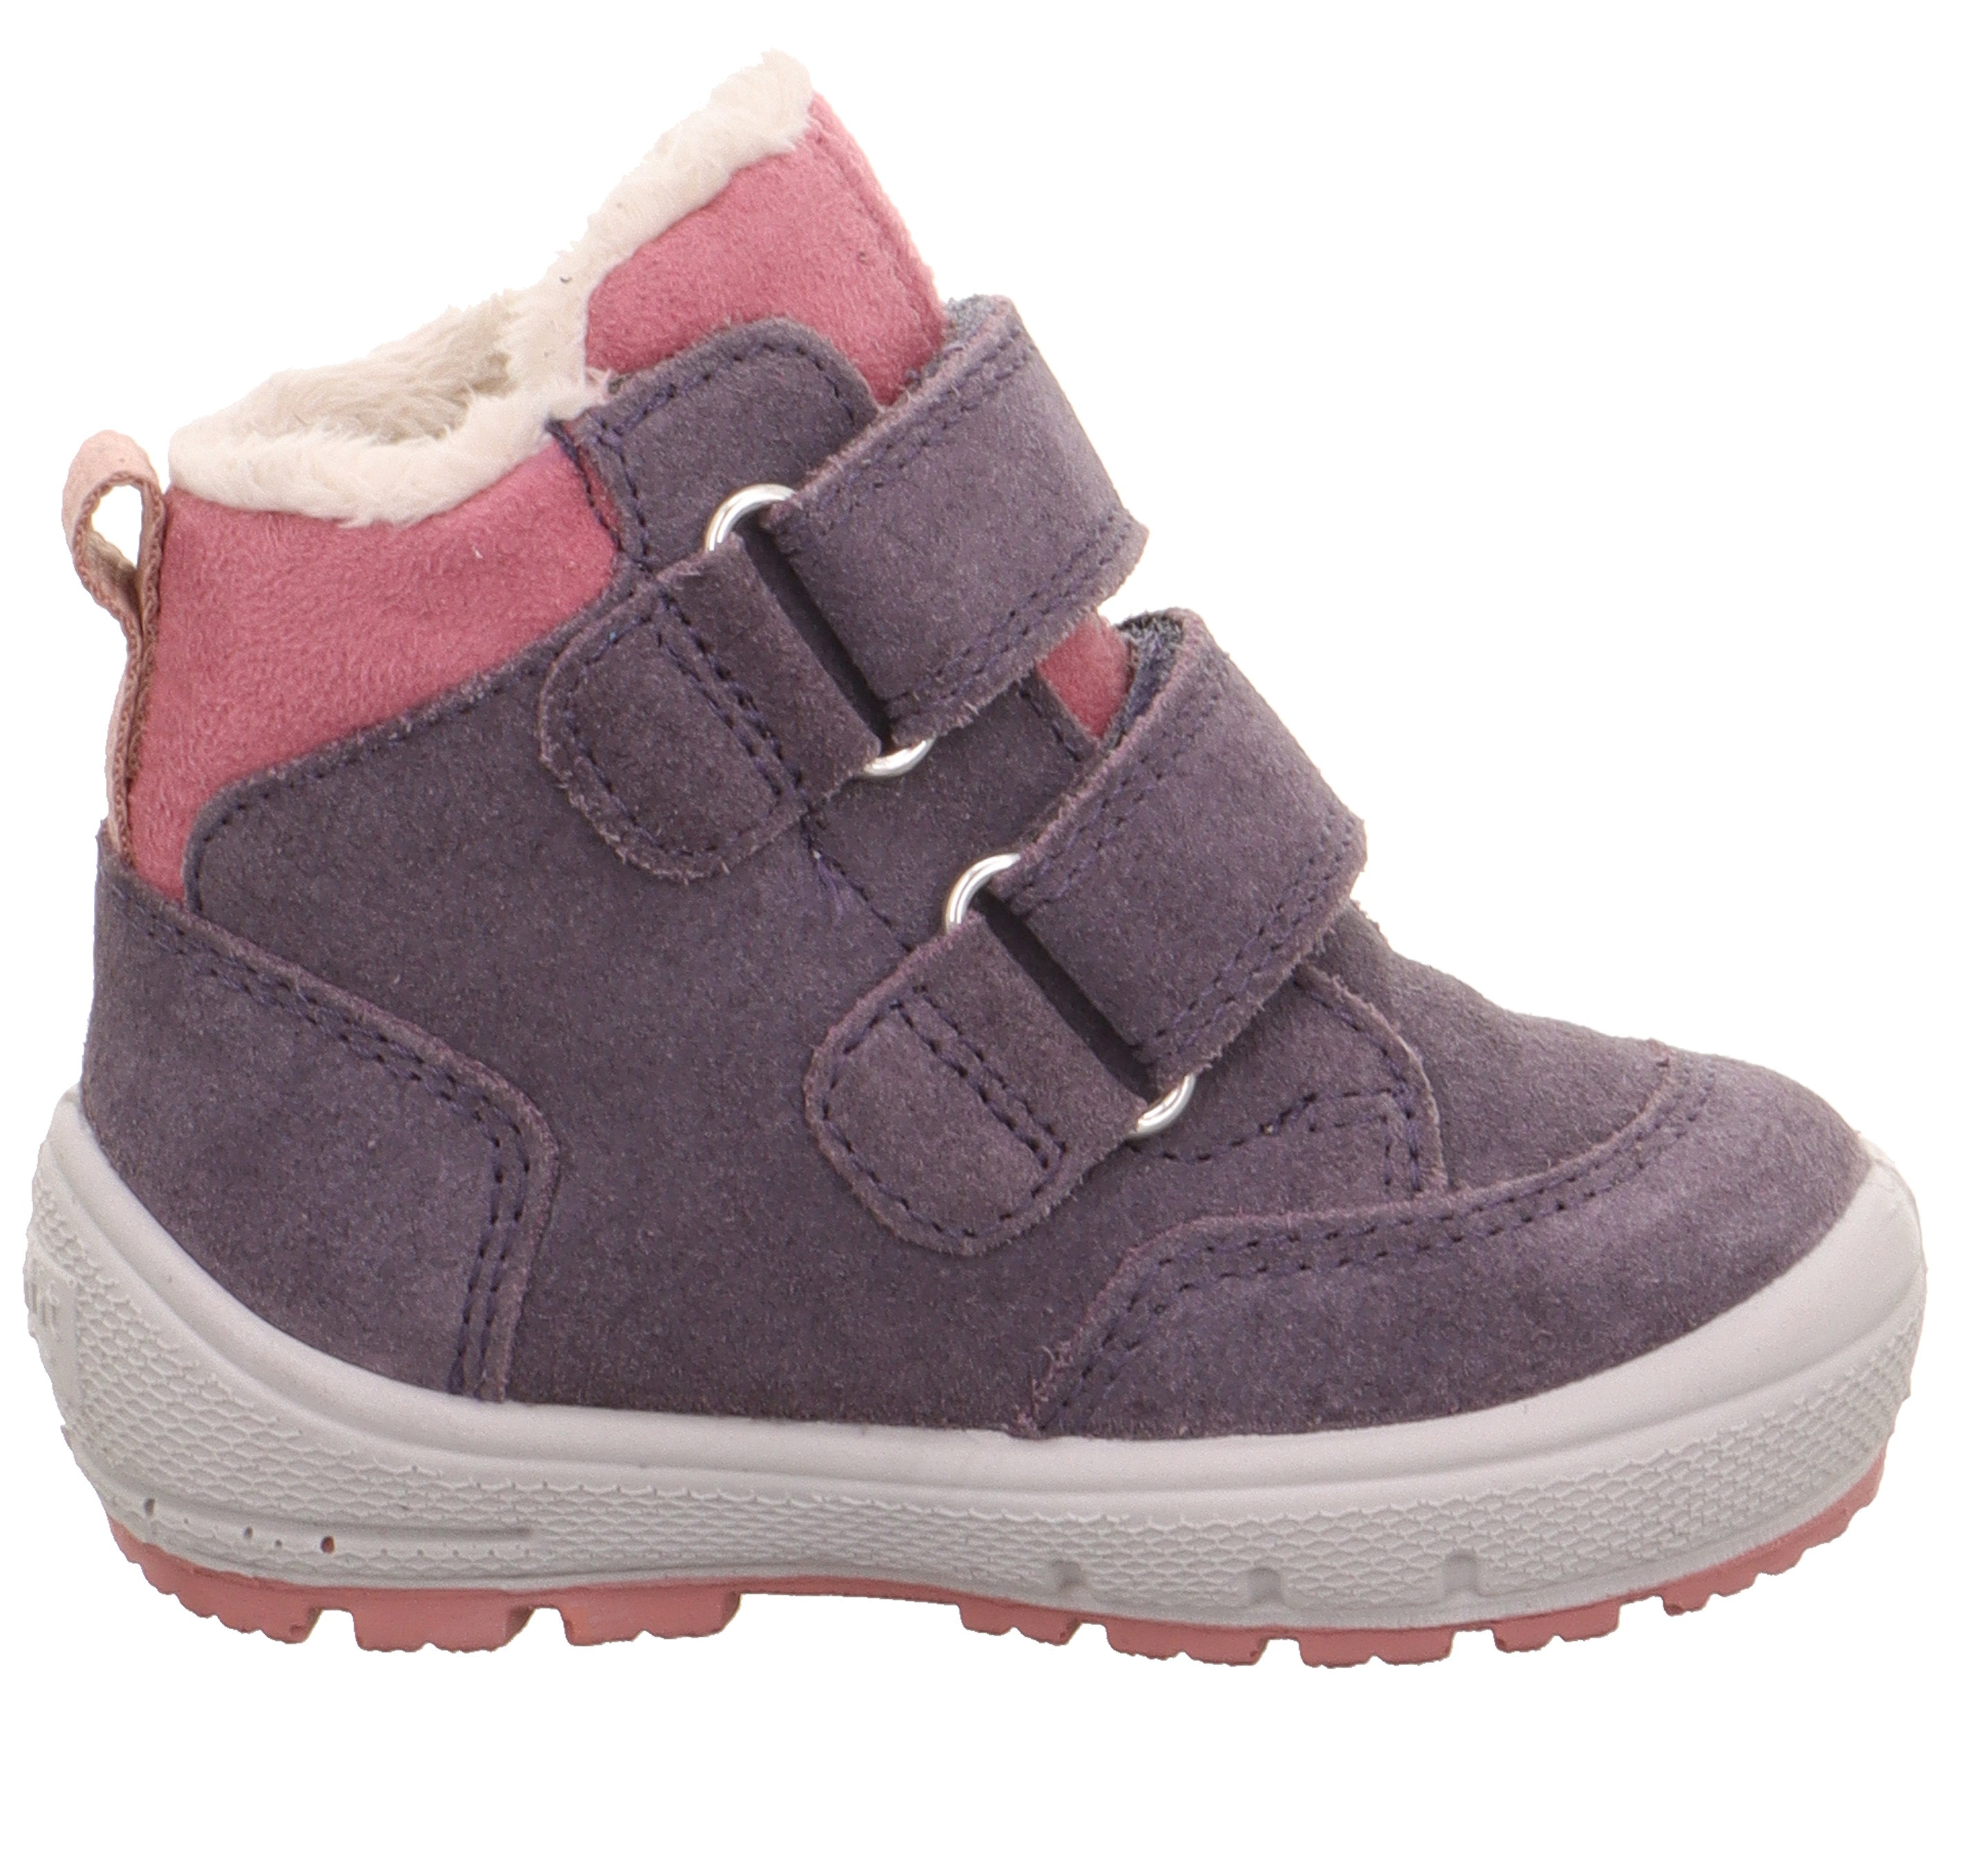 Girls Boots at SHUSCAPE